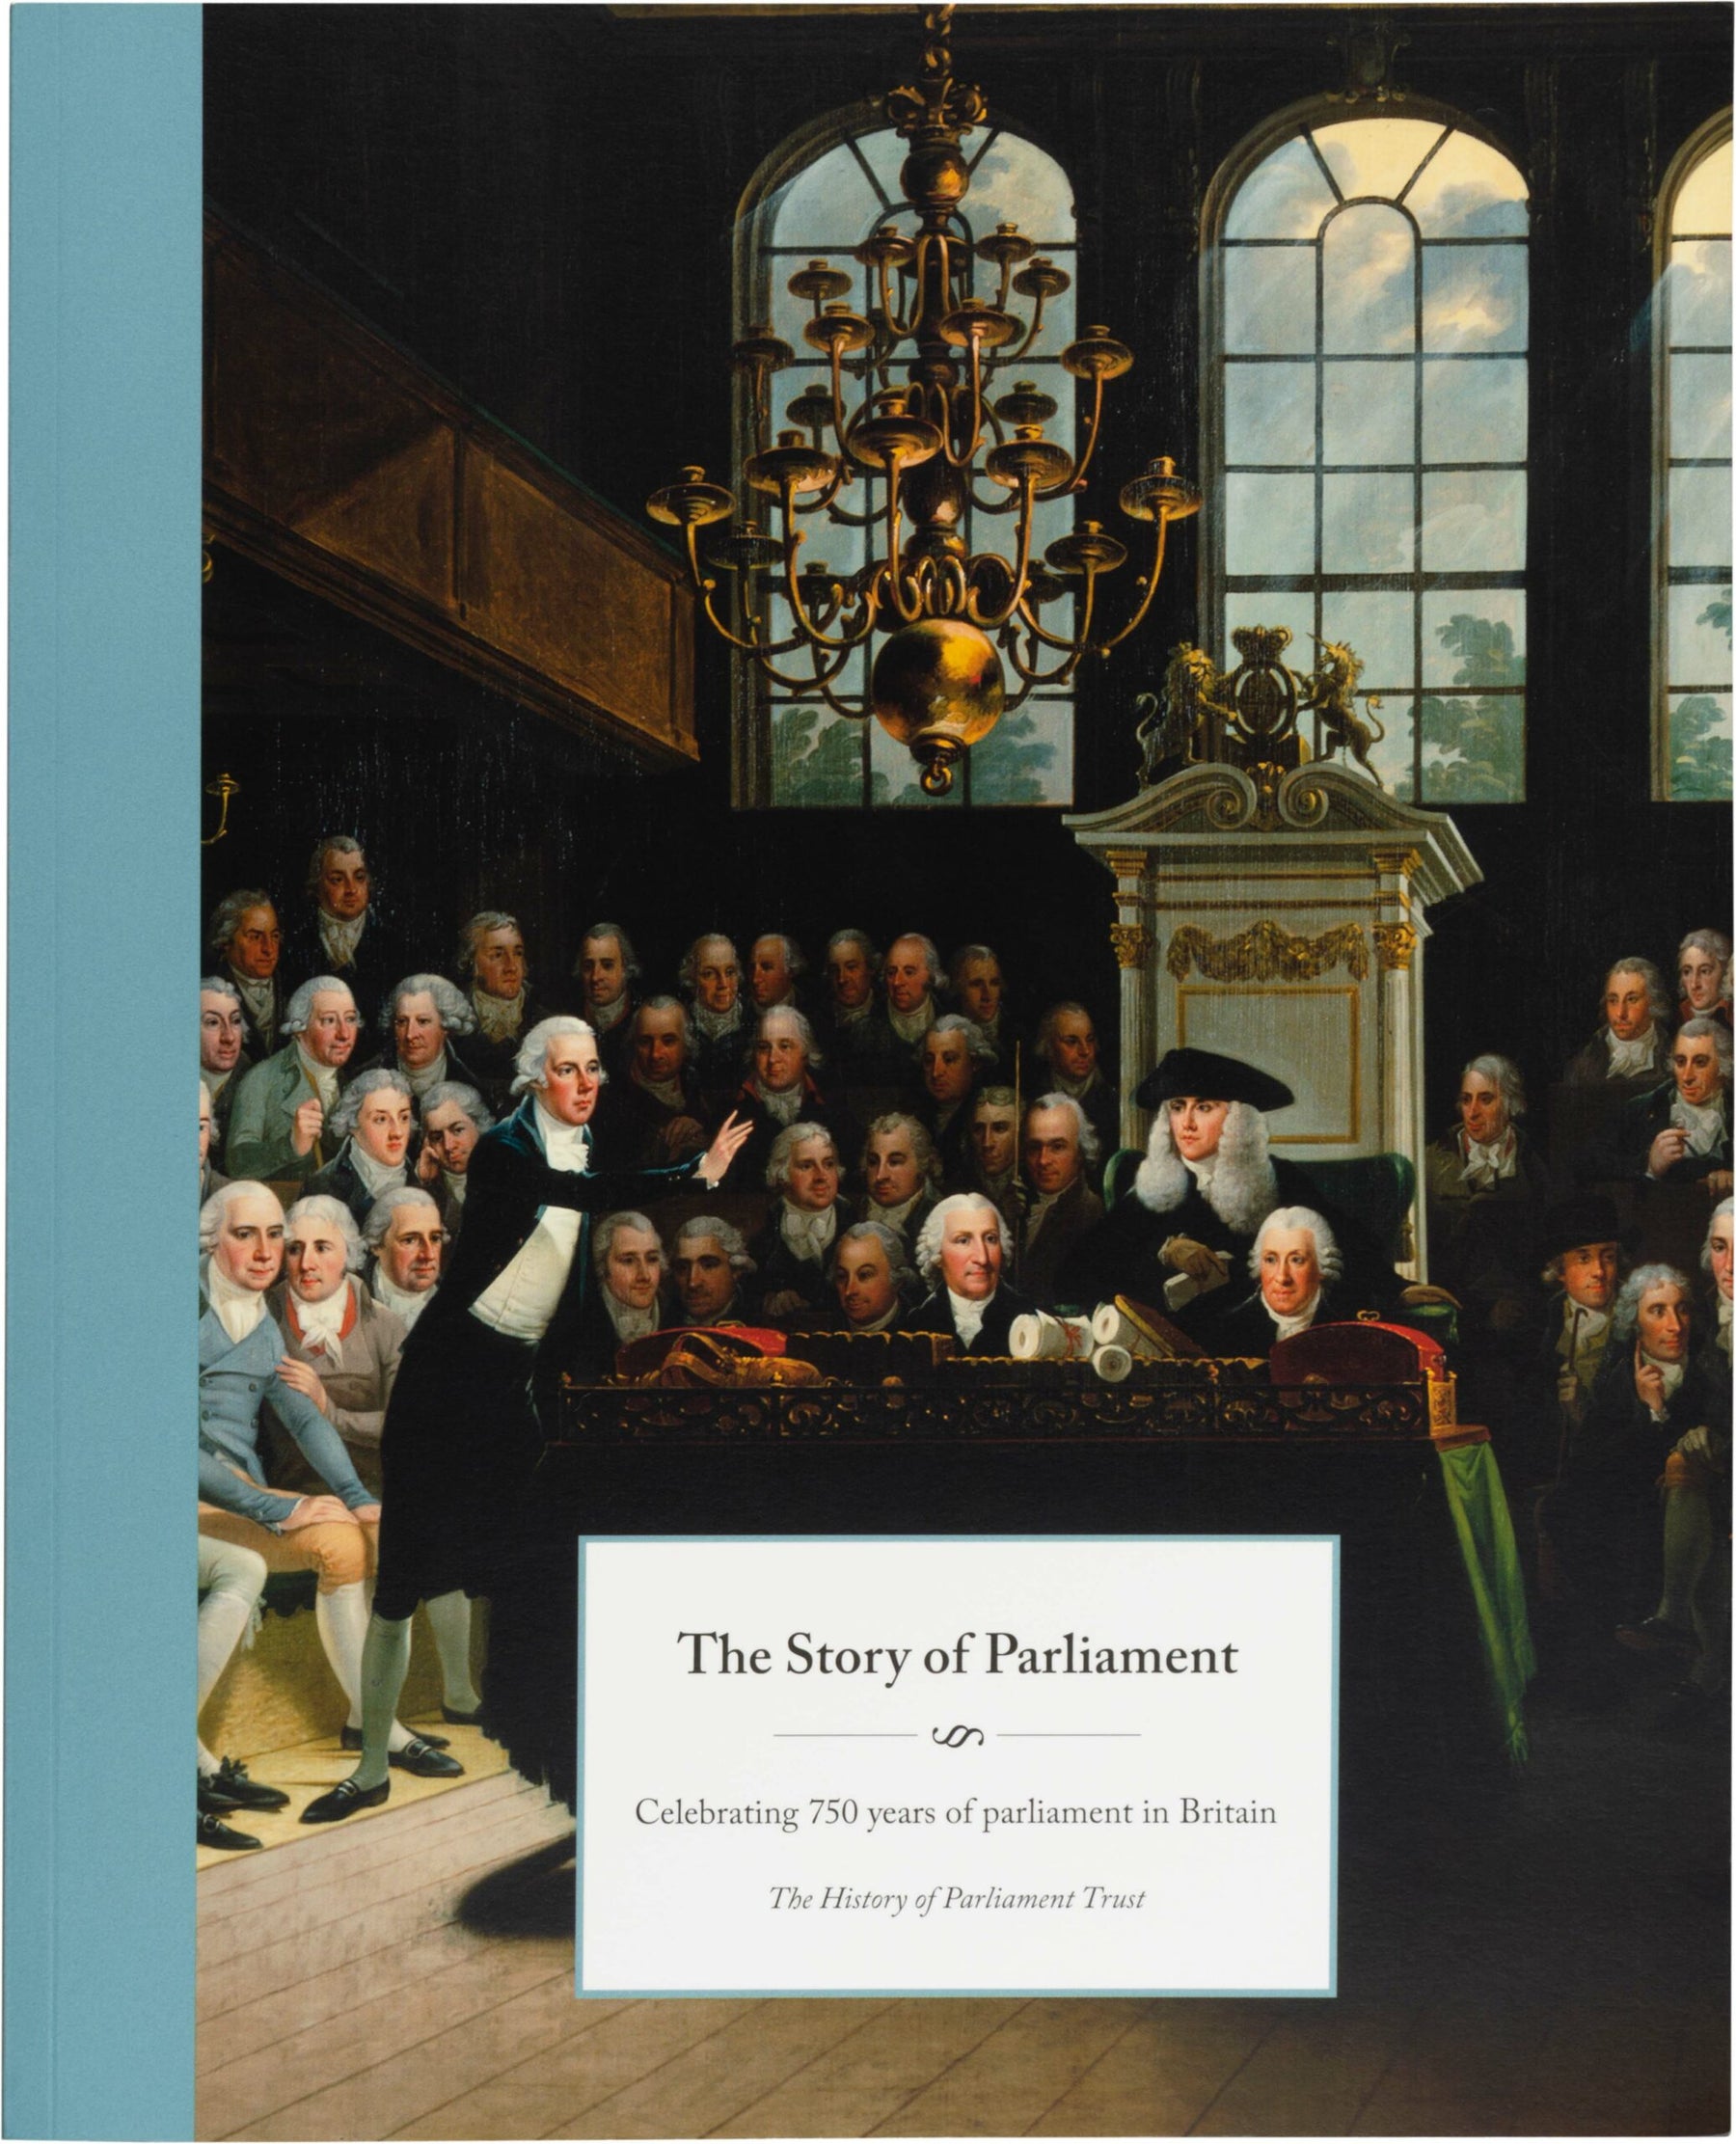 The Story of Parliament: Celebrating 750 years of parliament in Britain